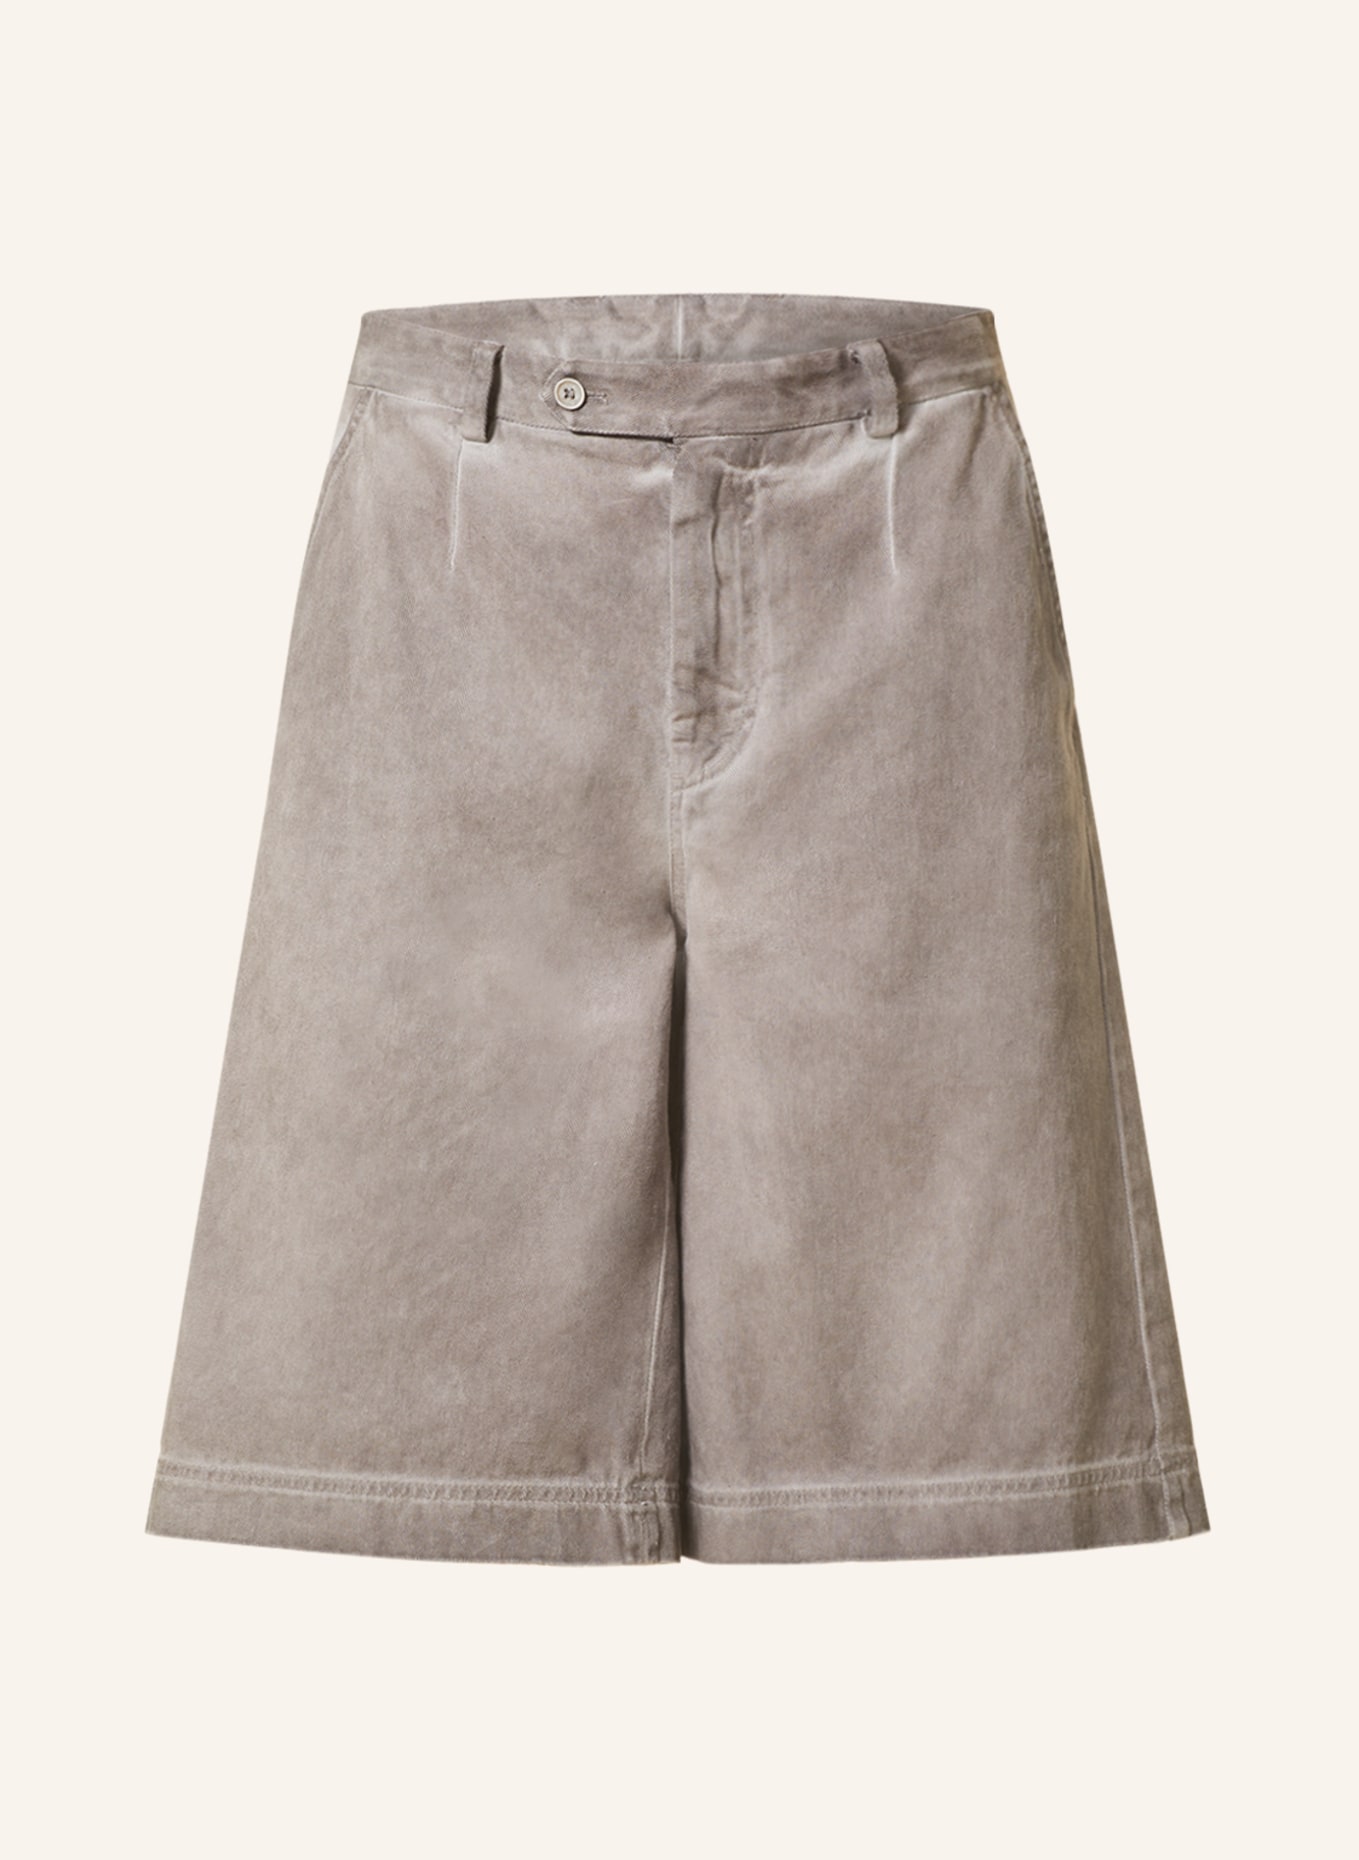 DOLCE & GABBANA Jeansshorts Loose Fit, Farbe: TAUPE (Bild 1)